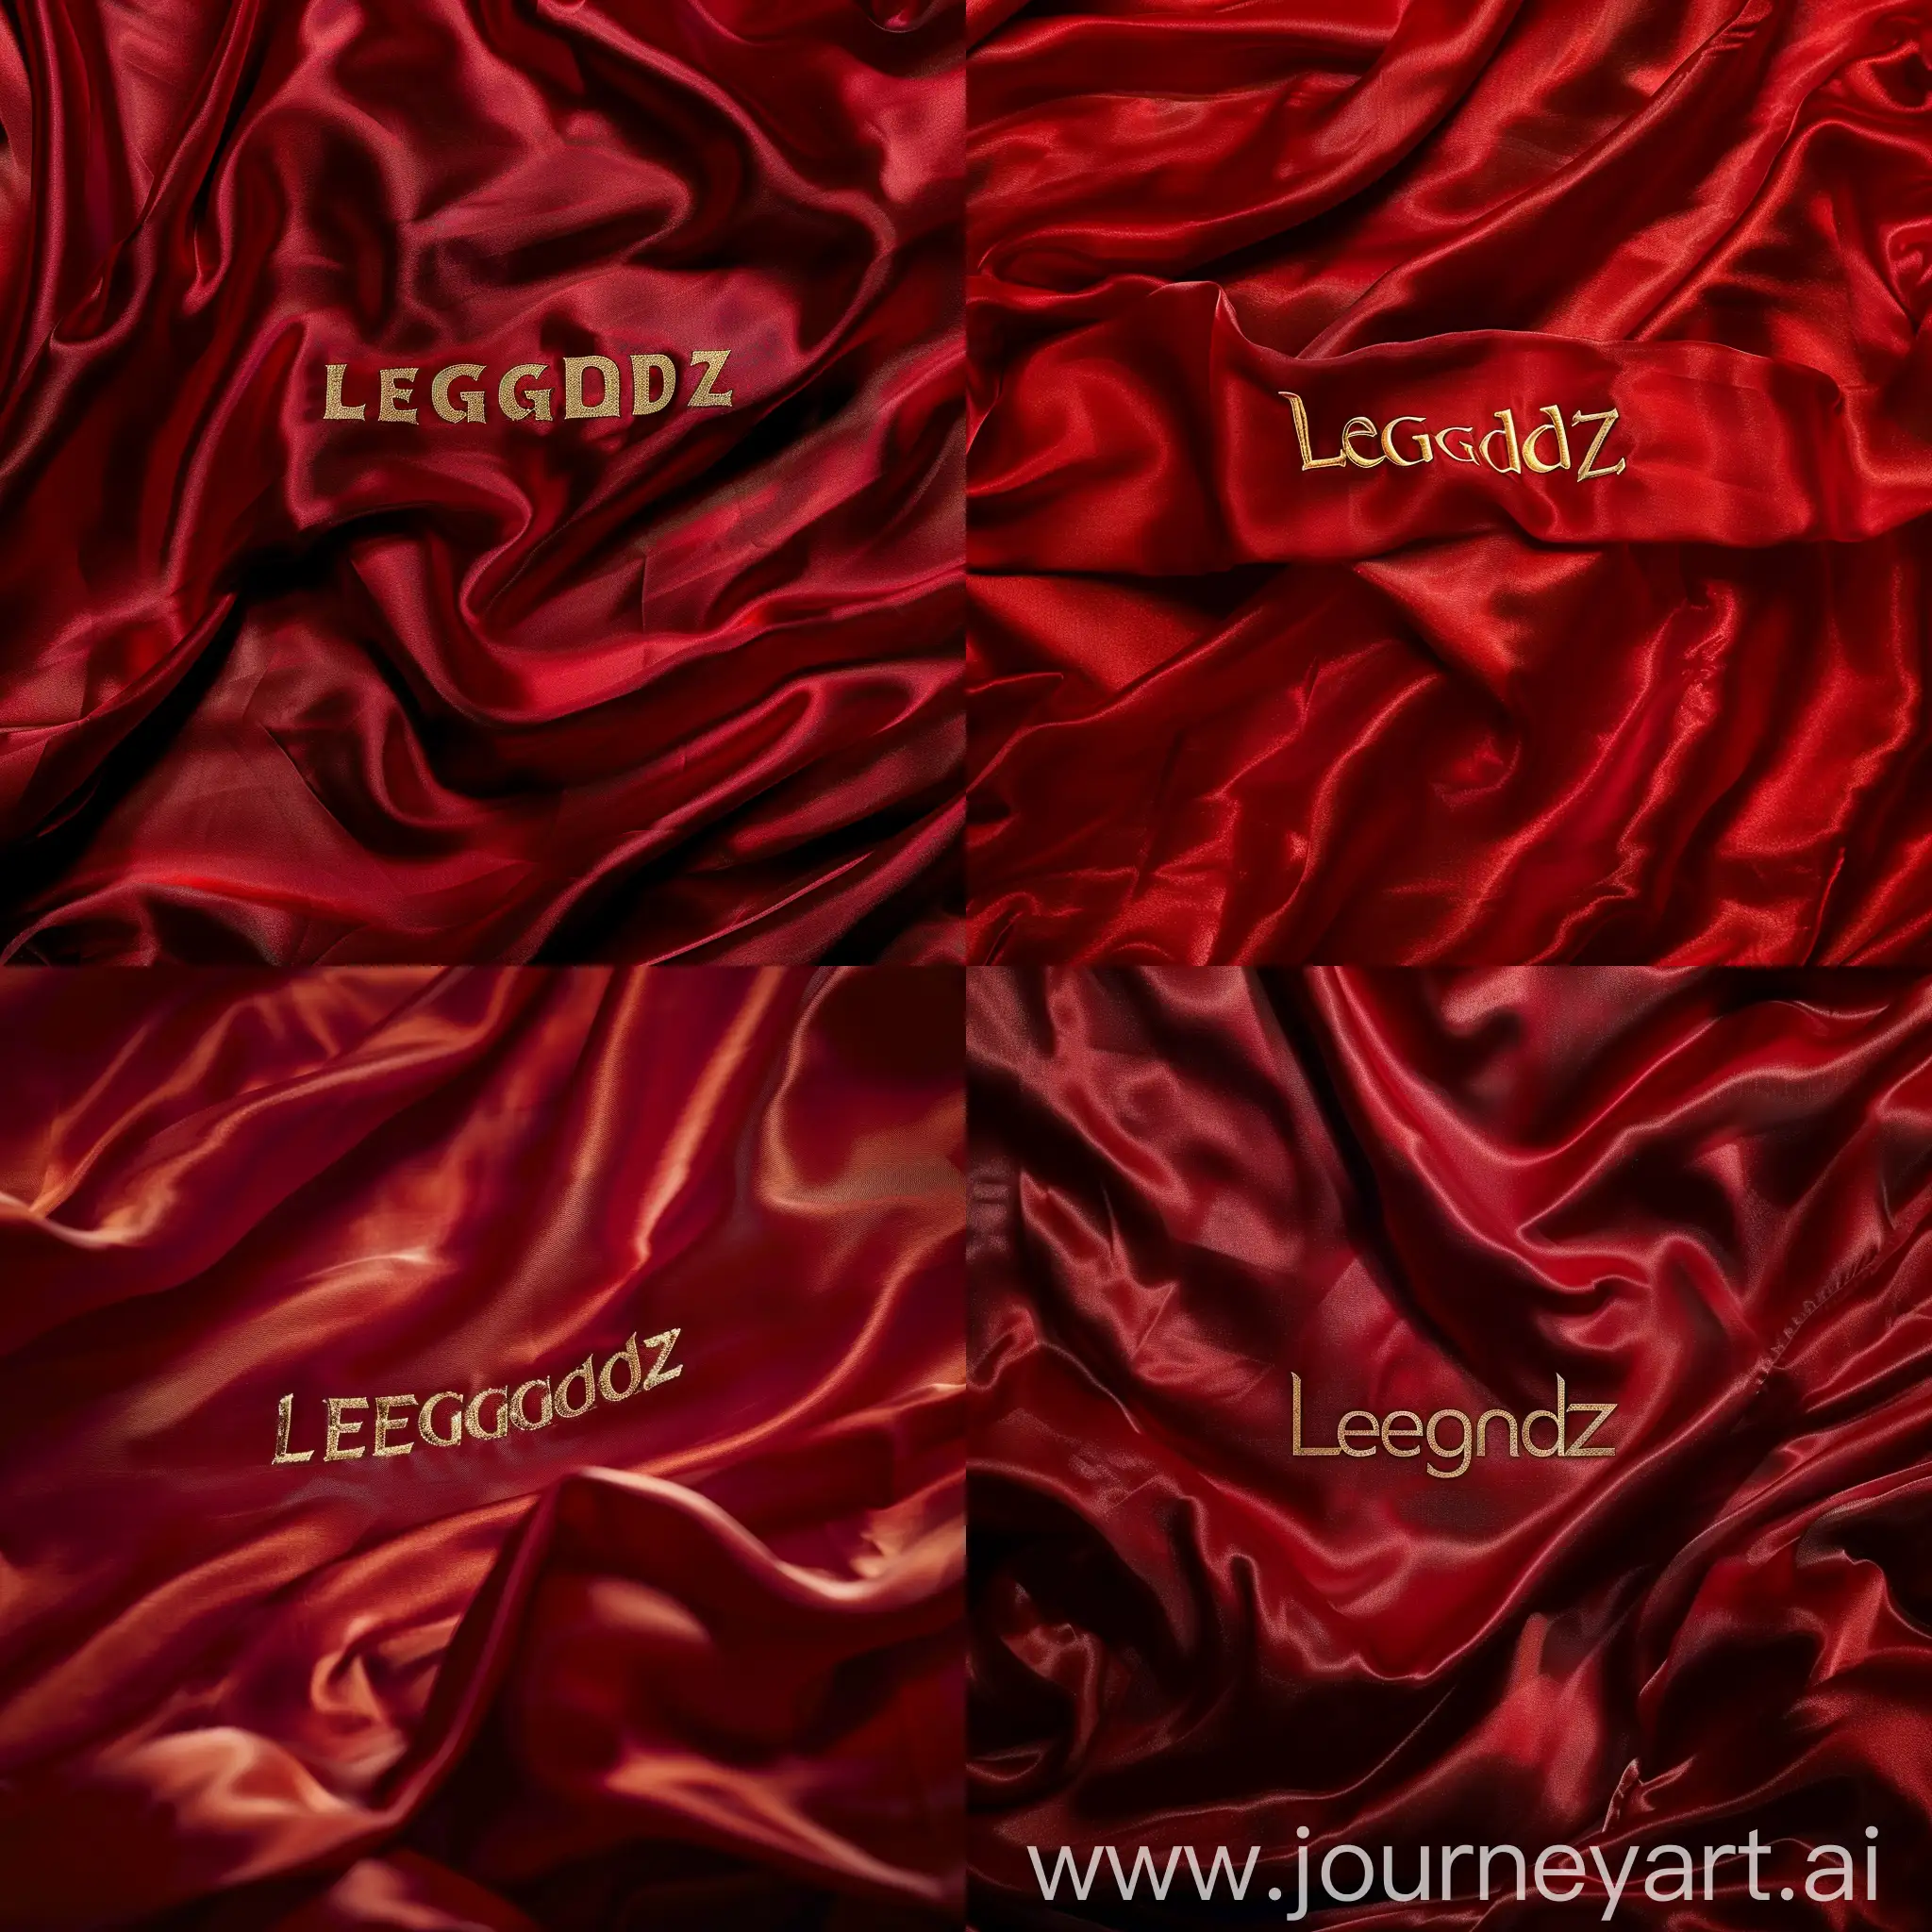 A close-up of a red silk banner waving in the wind. The word 'Legendz' is emblazoned across the center in gleaming gold letters.